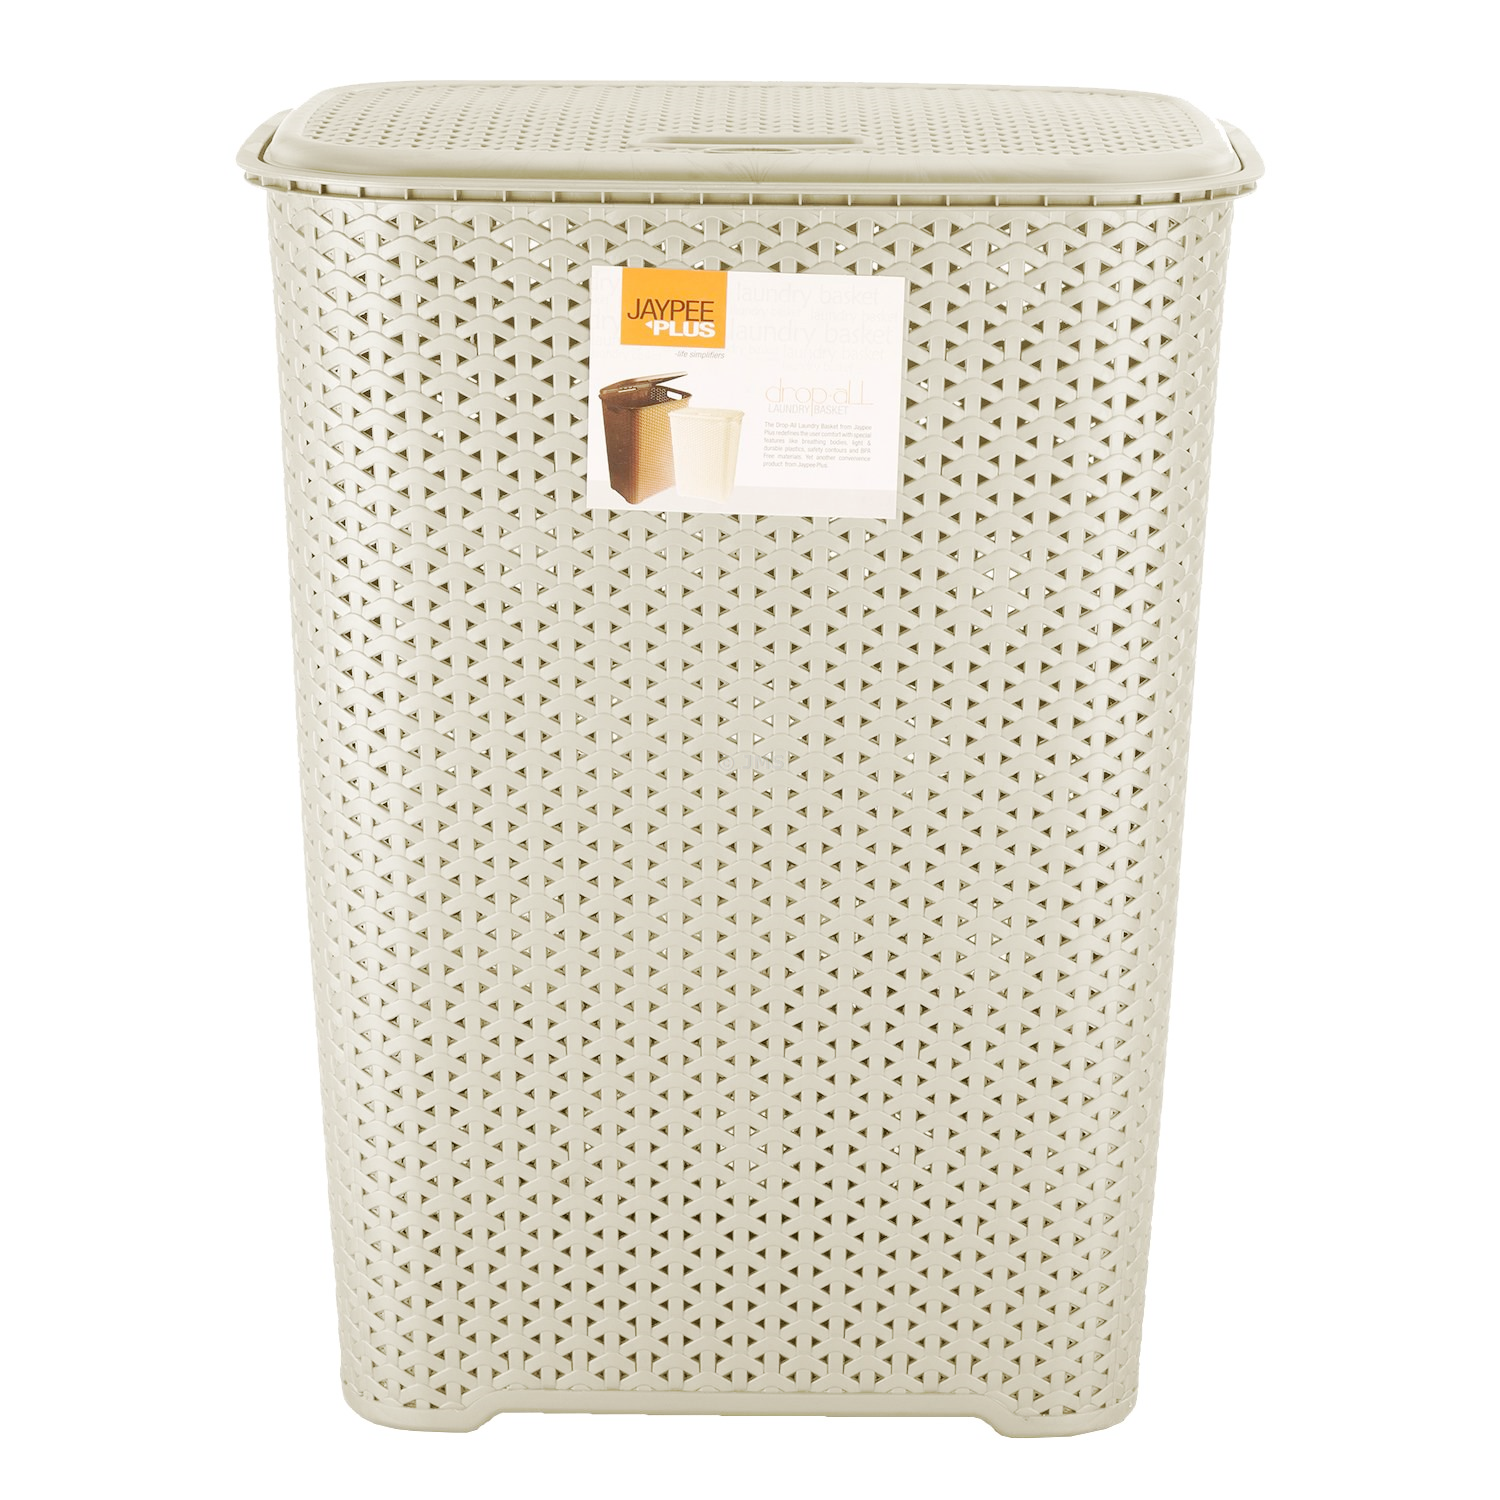 Drop All 65L Large Plastic Laundry Basket with Lid Washing Dirty Clothes Storage Linen Bin Tidy - Beige